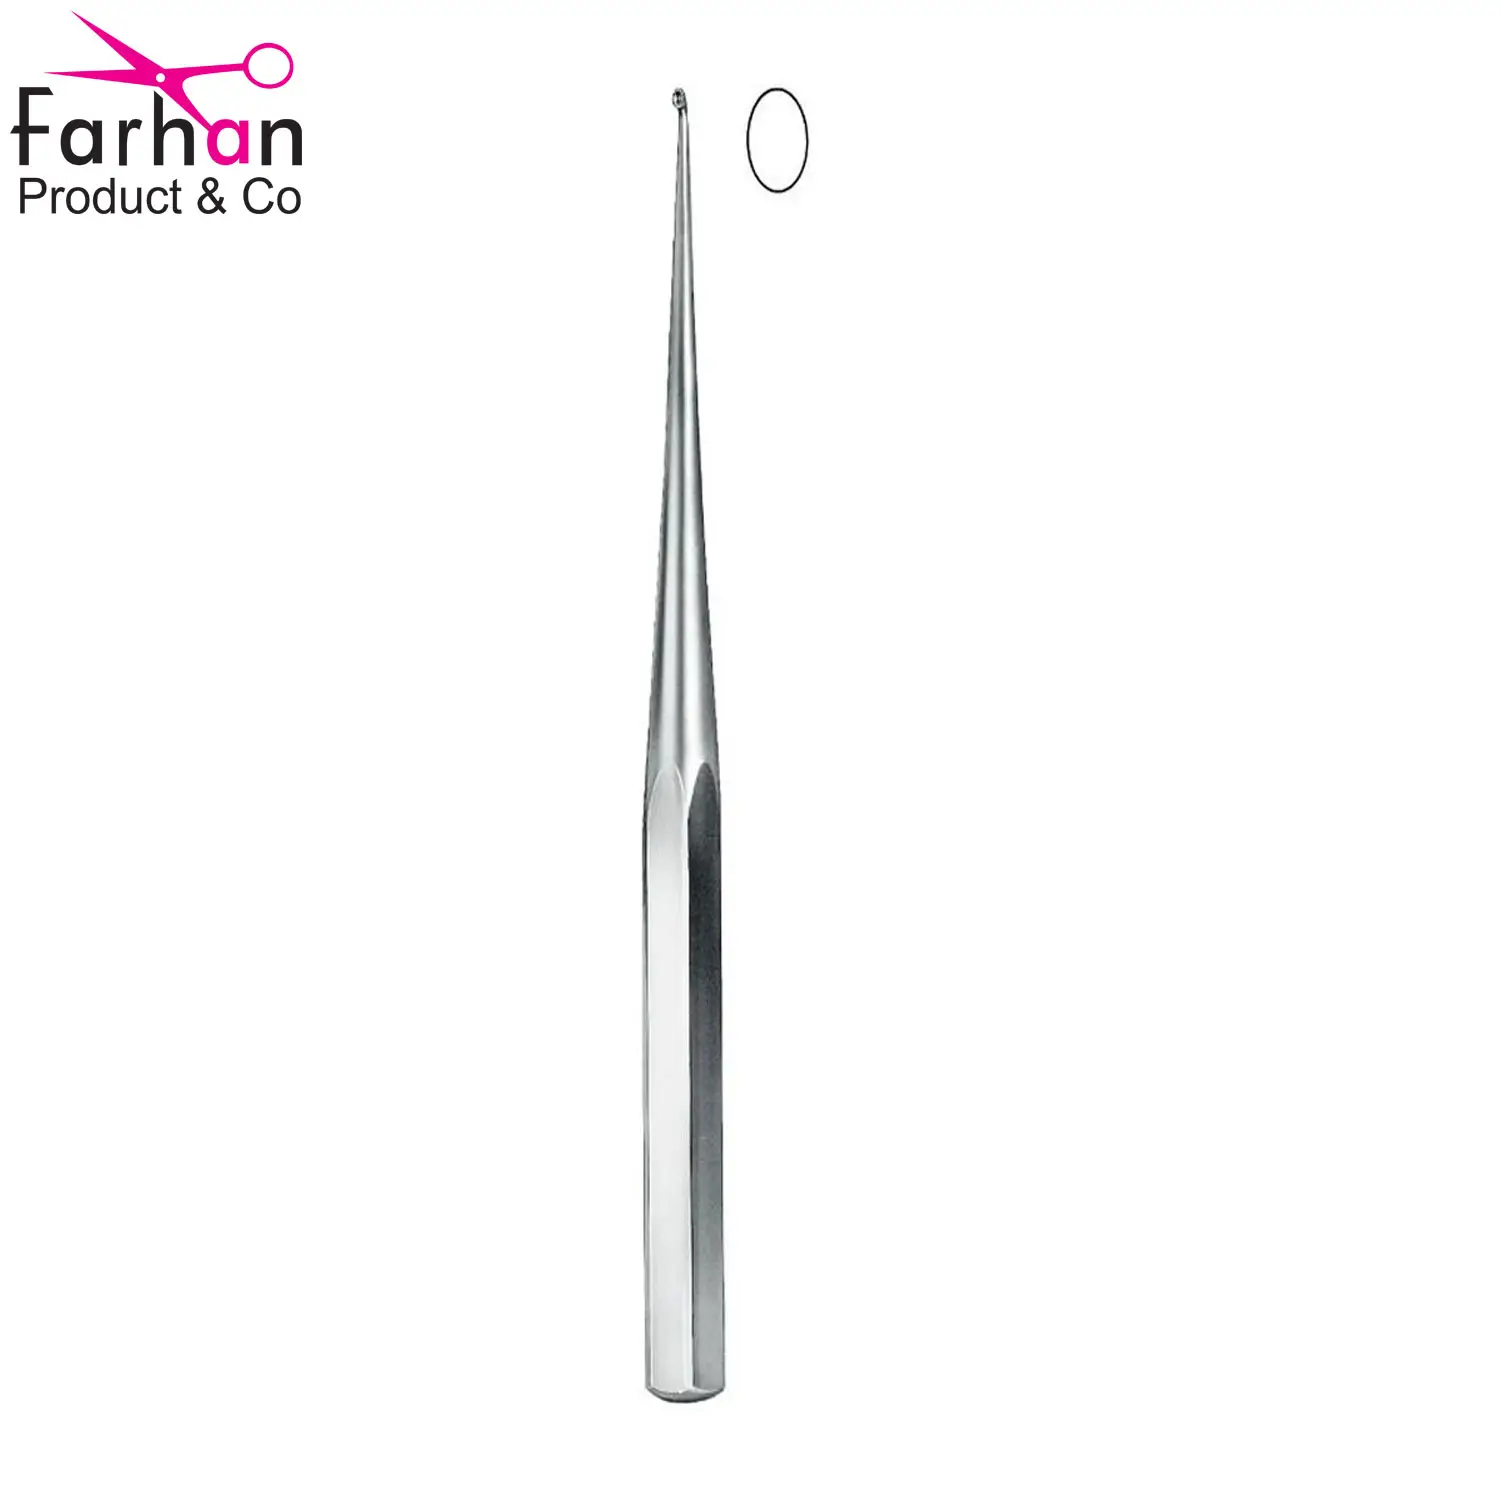 Spinal Fusion Curette 9'' Angled Size 3 Oval Cup Brun Handle Stainless Steel Neuro-Spine Orthopedic Surgical Instruments